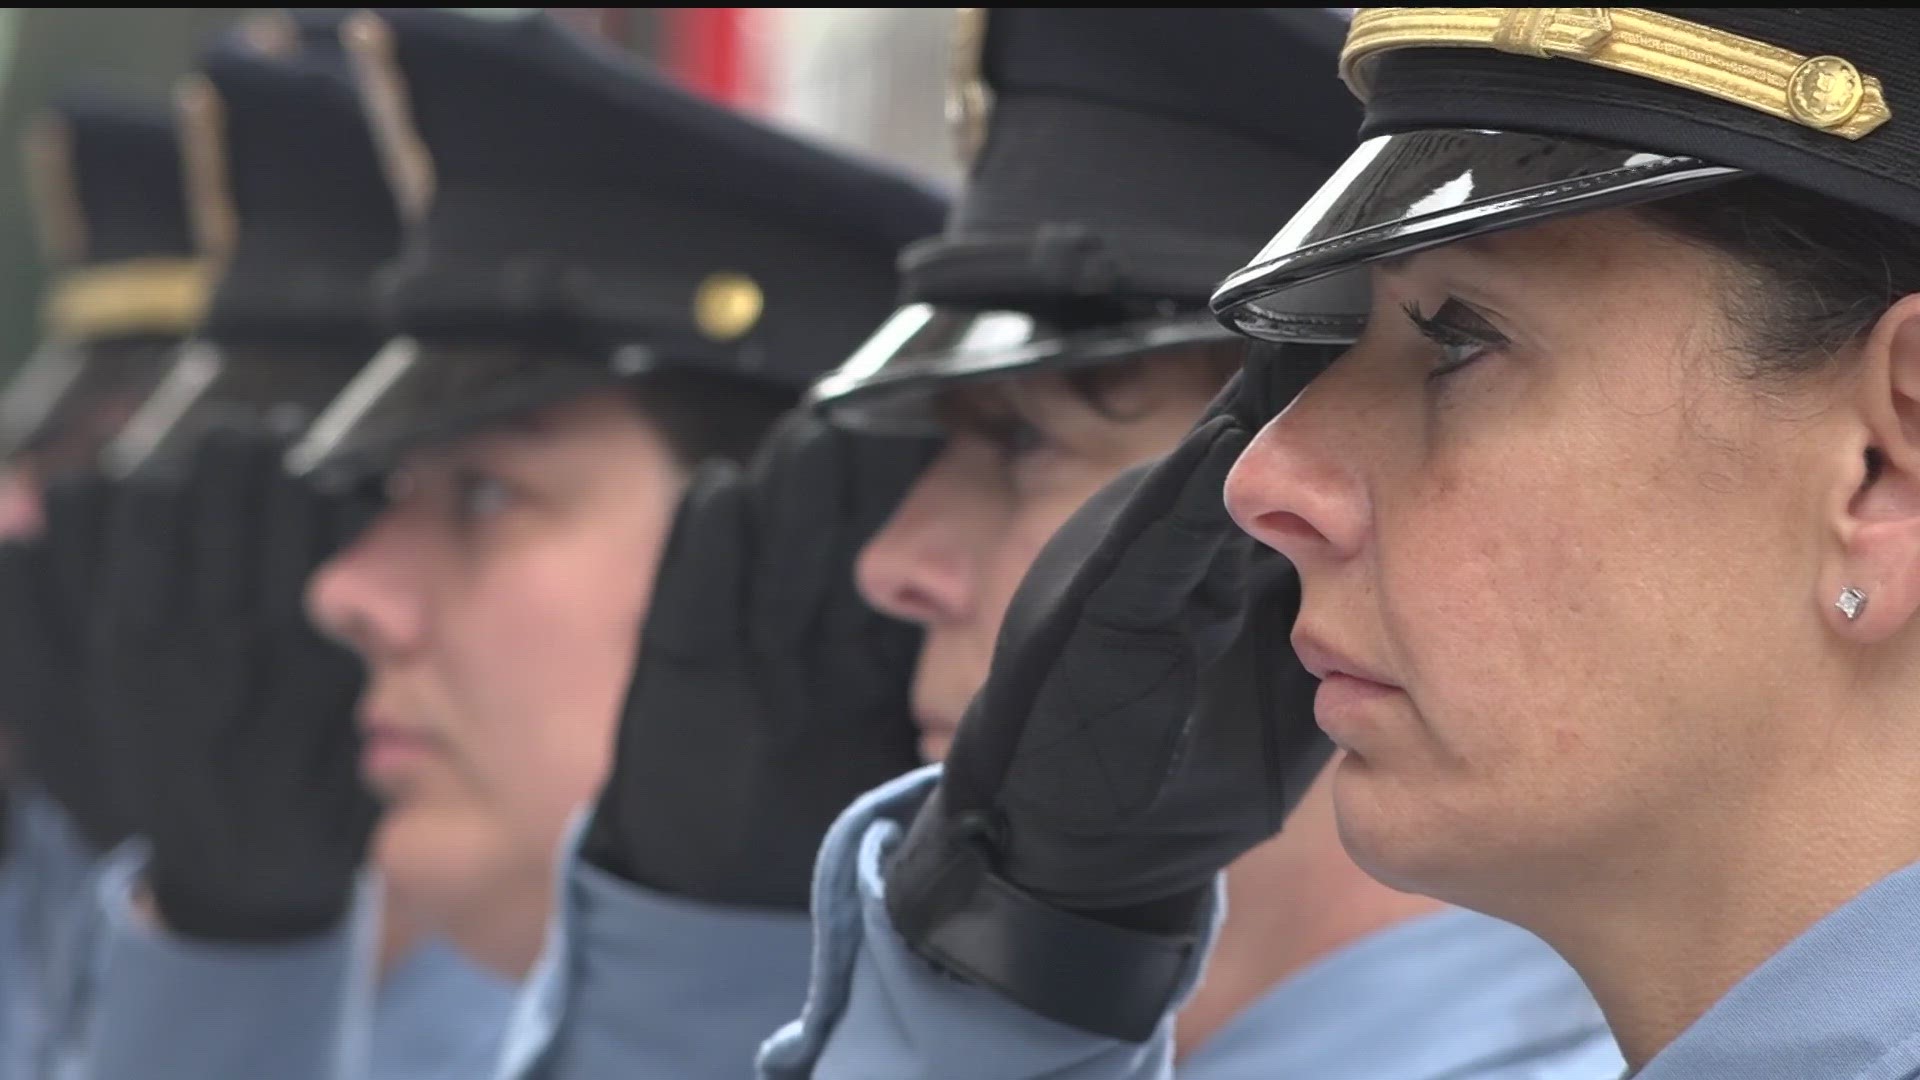 Officers listened to 67 names of fallen comrades.